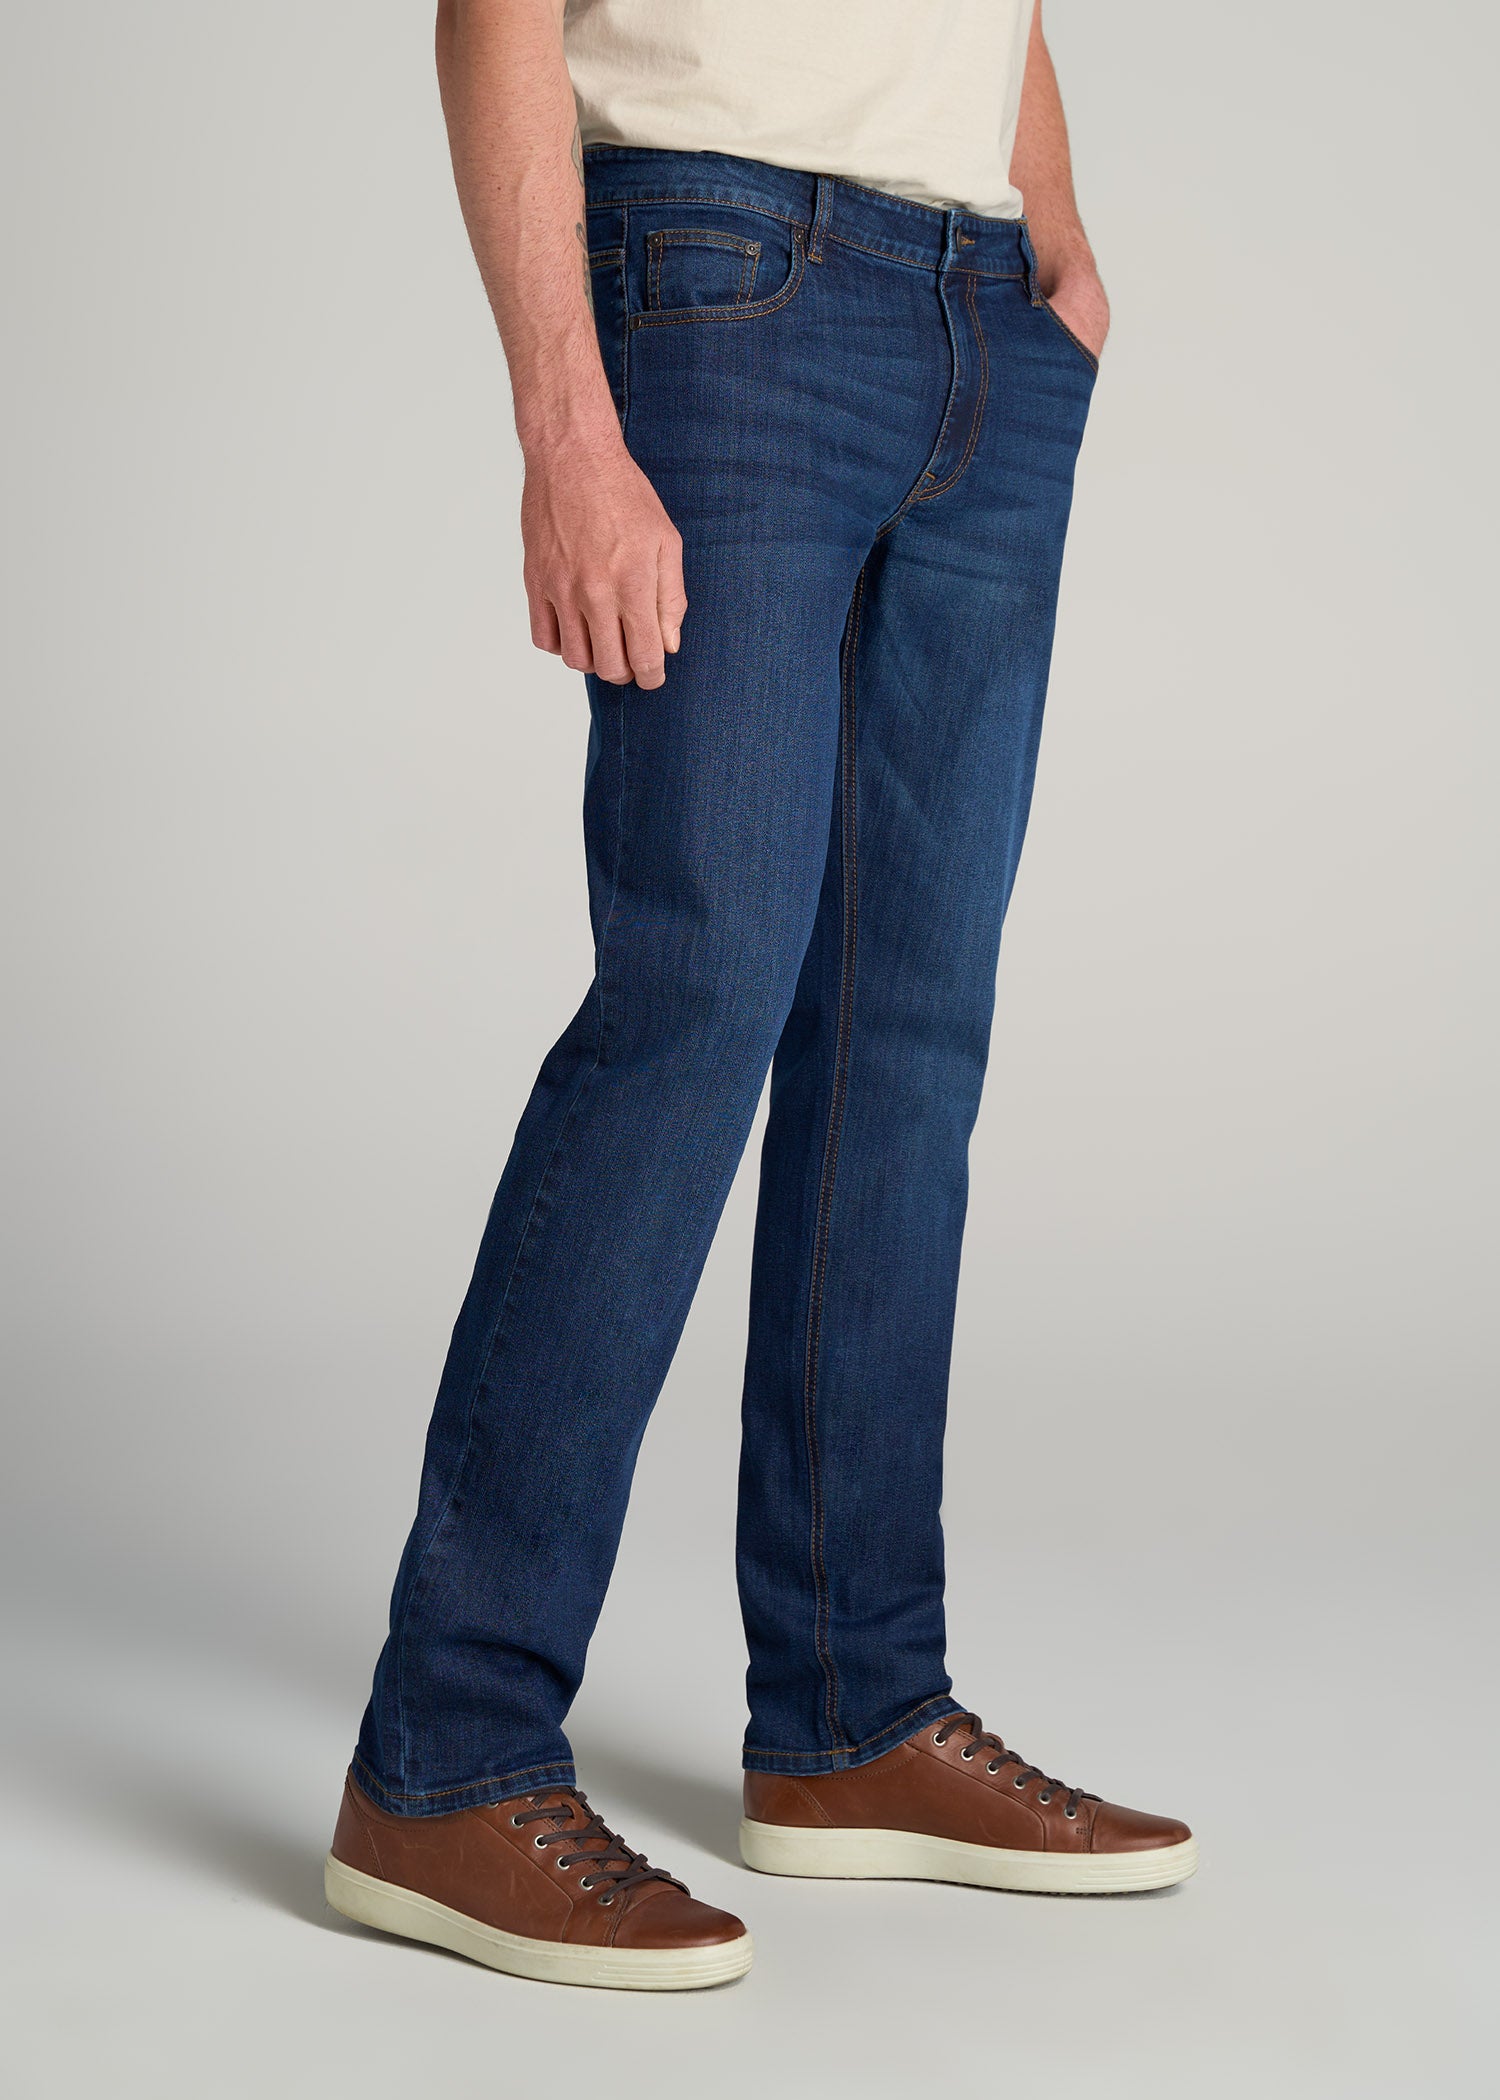 Tapering Jeans From The Inseam Explained